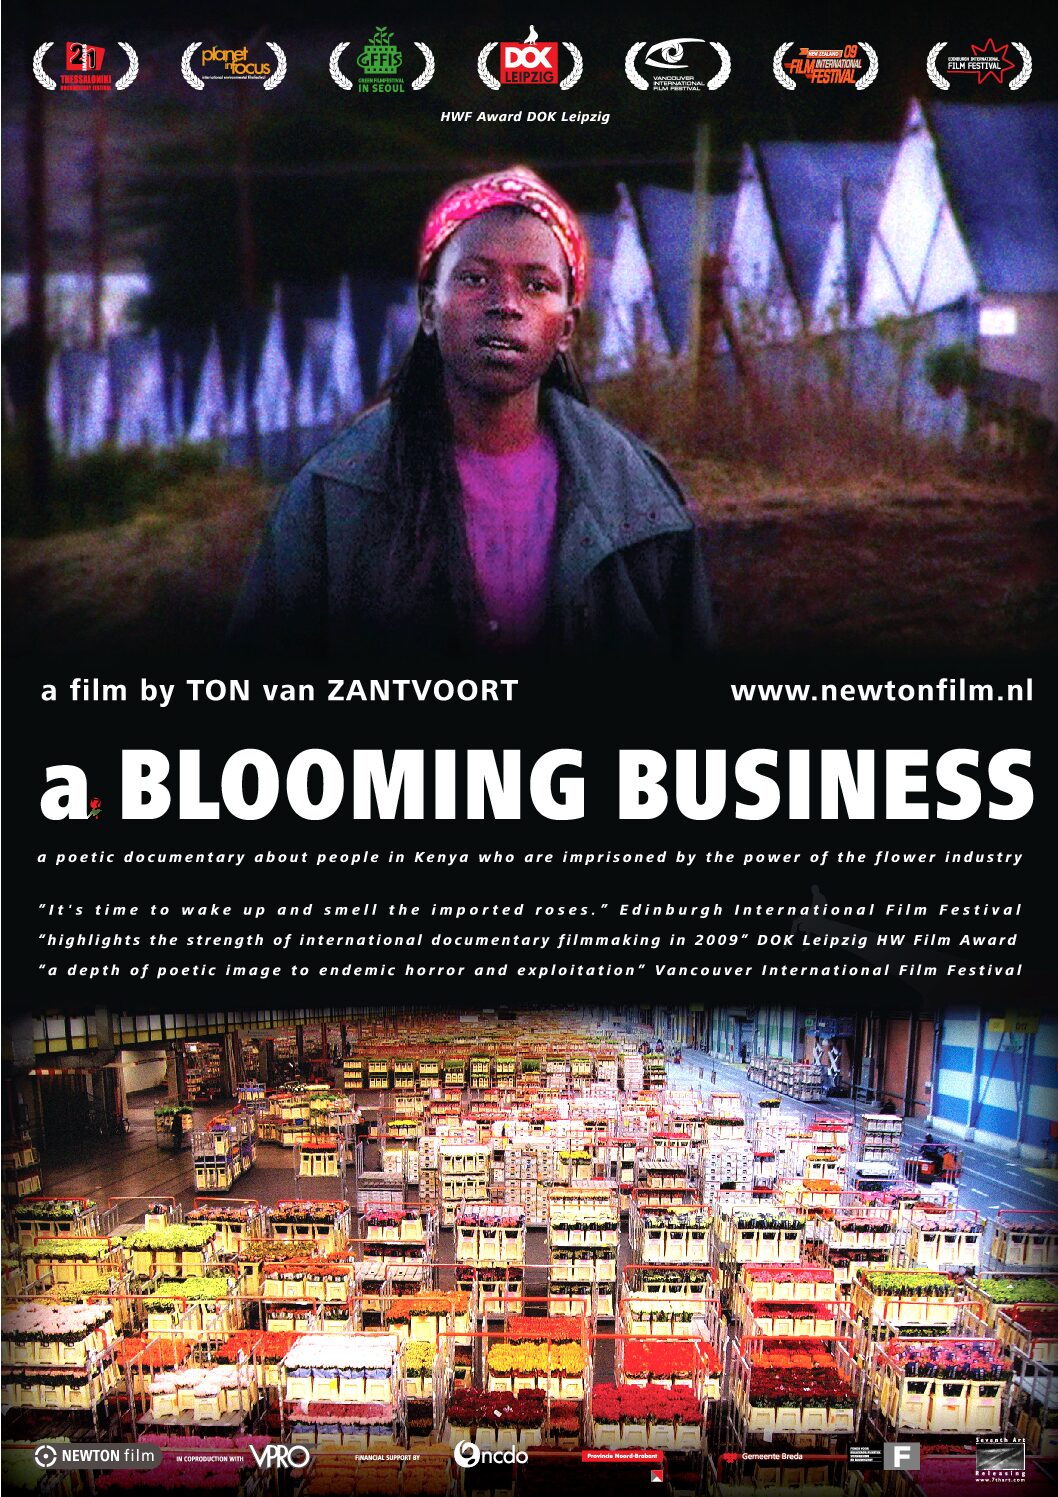 A BLOOMING BUSINESS